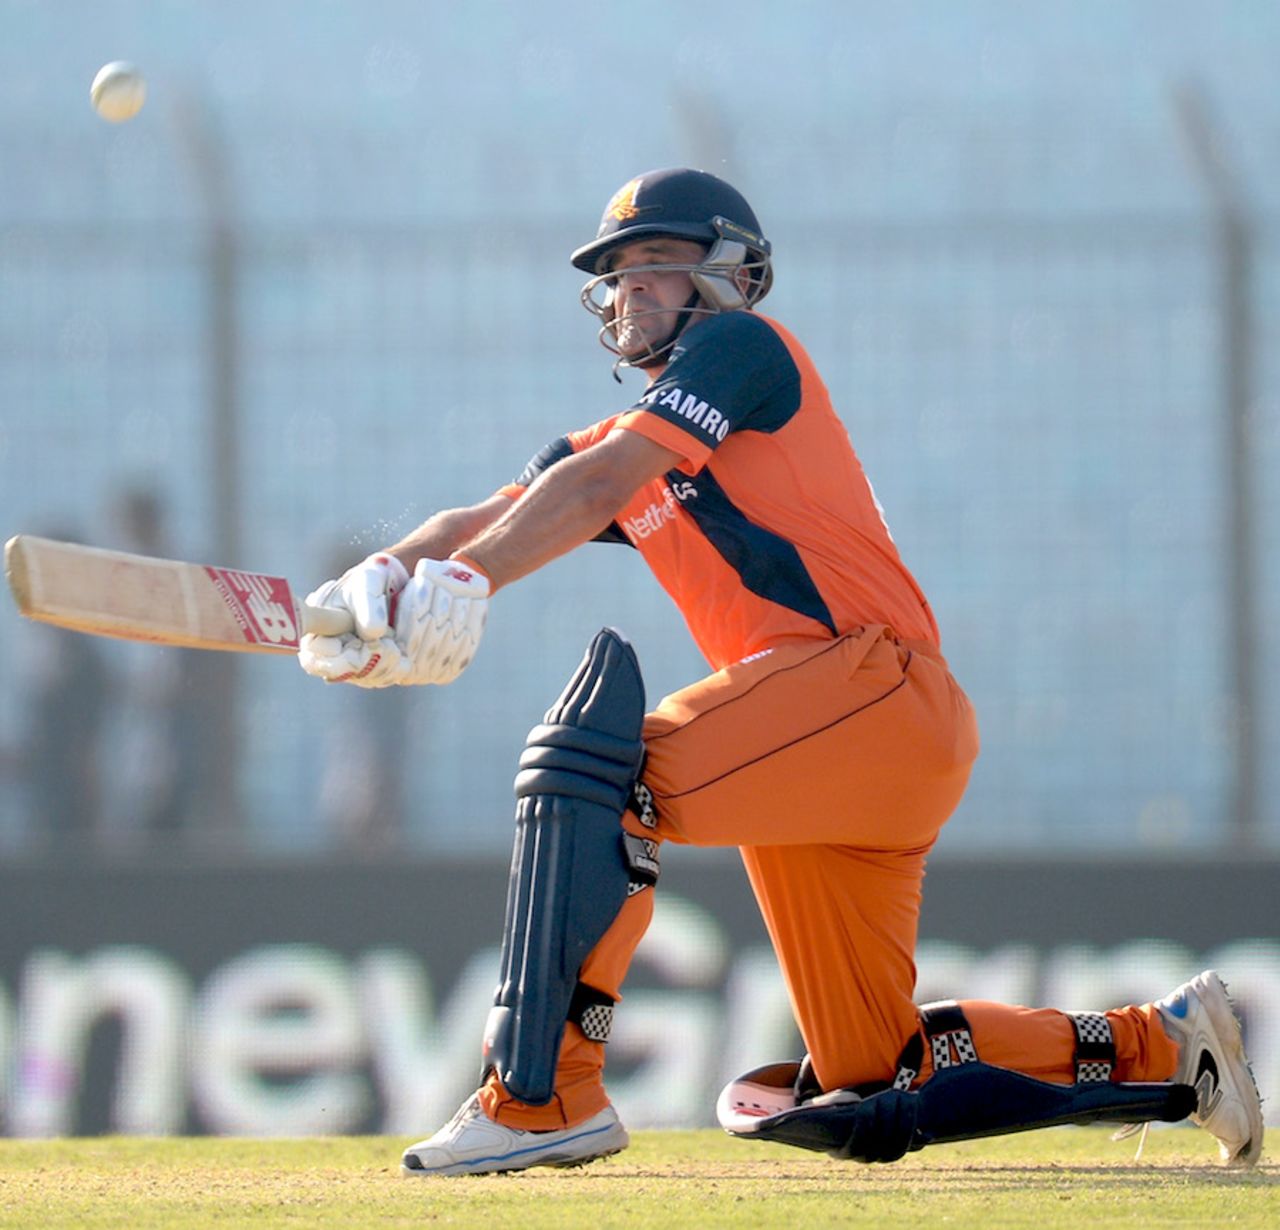 Peter Borren plays a powerful sweep, Netherlands v New Zealand, World T20, Group 1, Chittagong, March 29, 2014